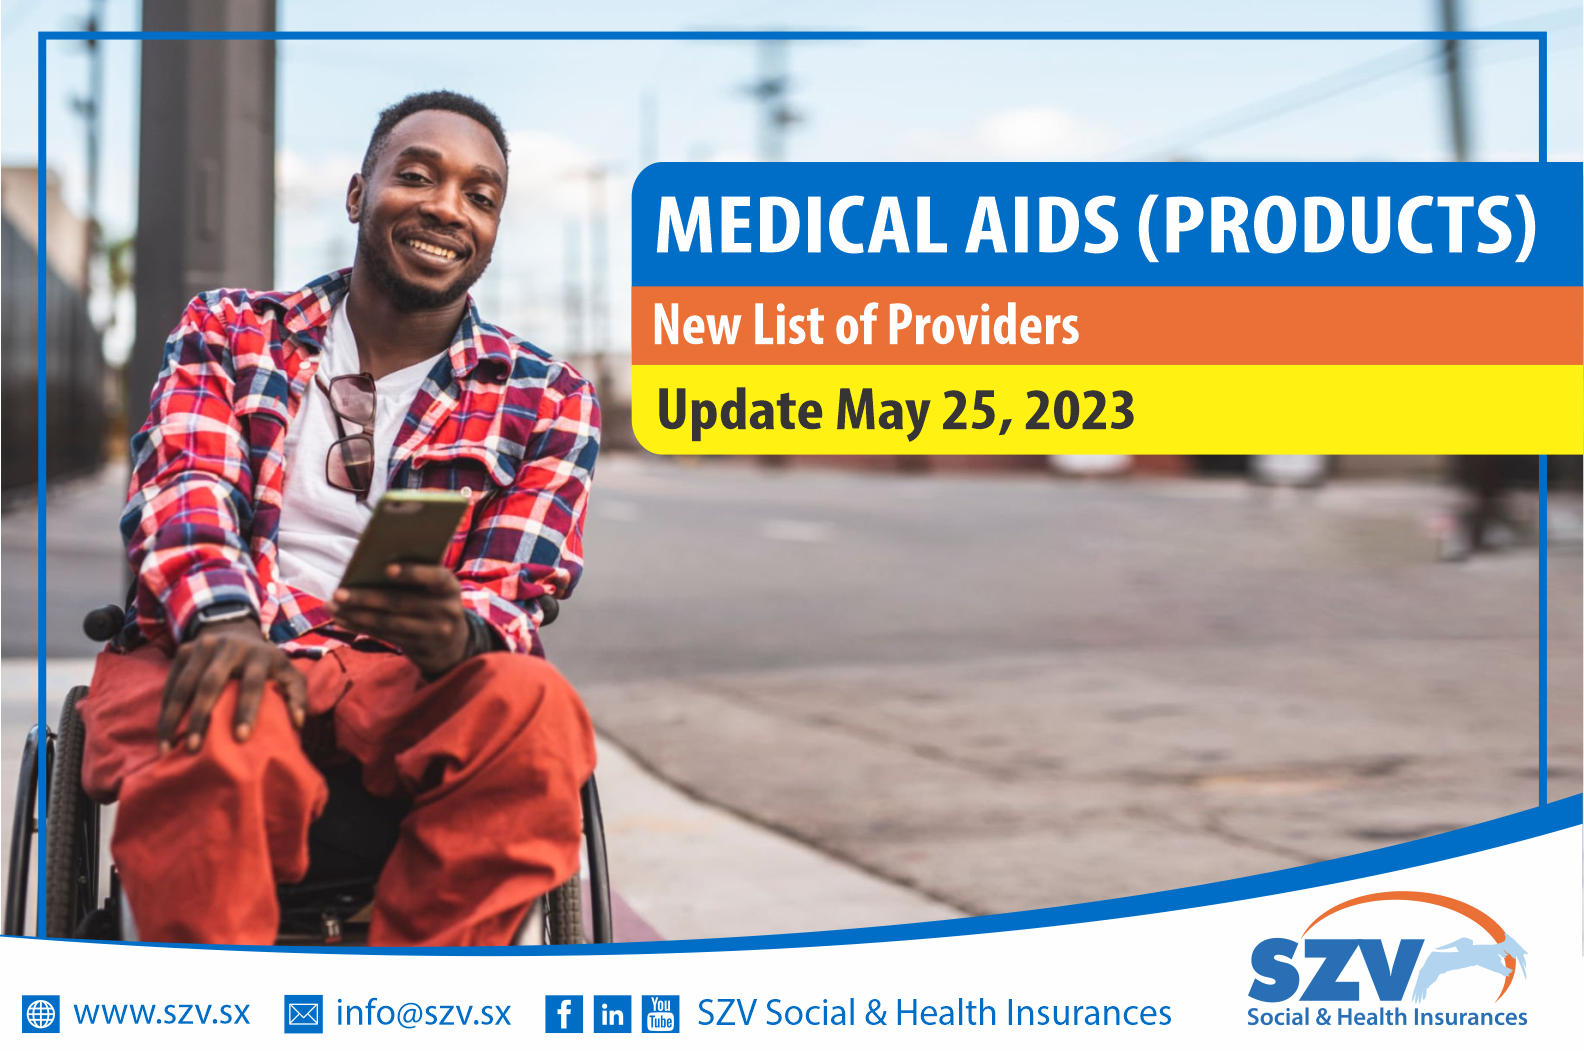 Updated: Medical Aids (Products) - New List of Providers